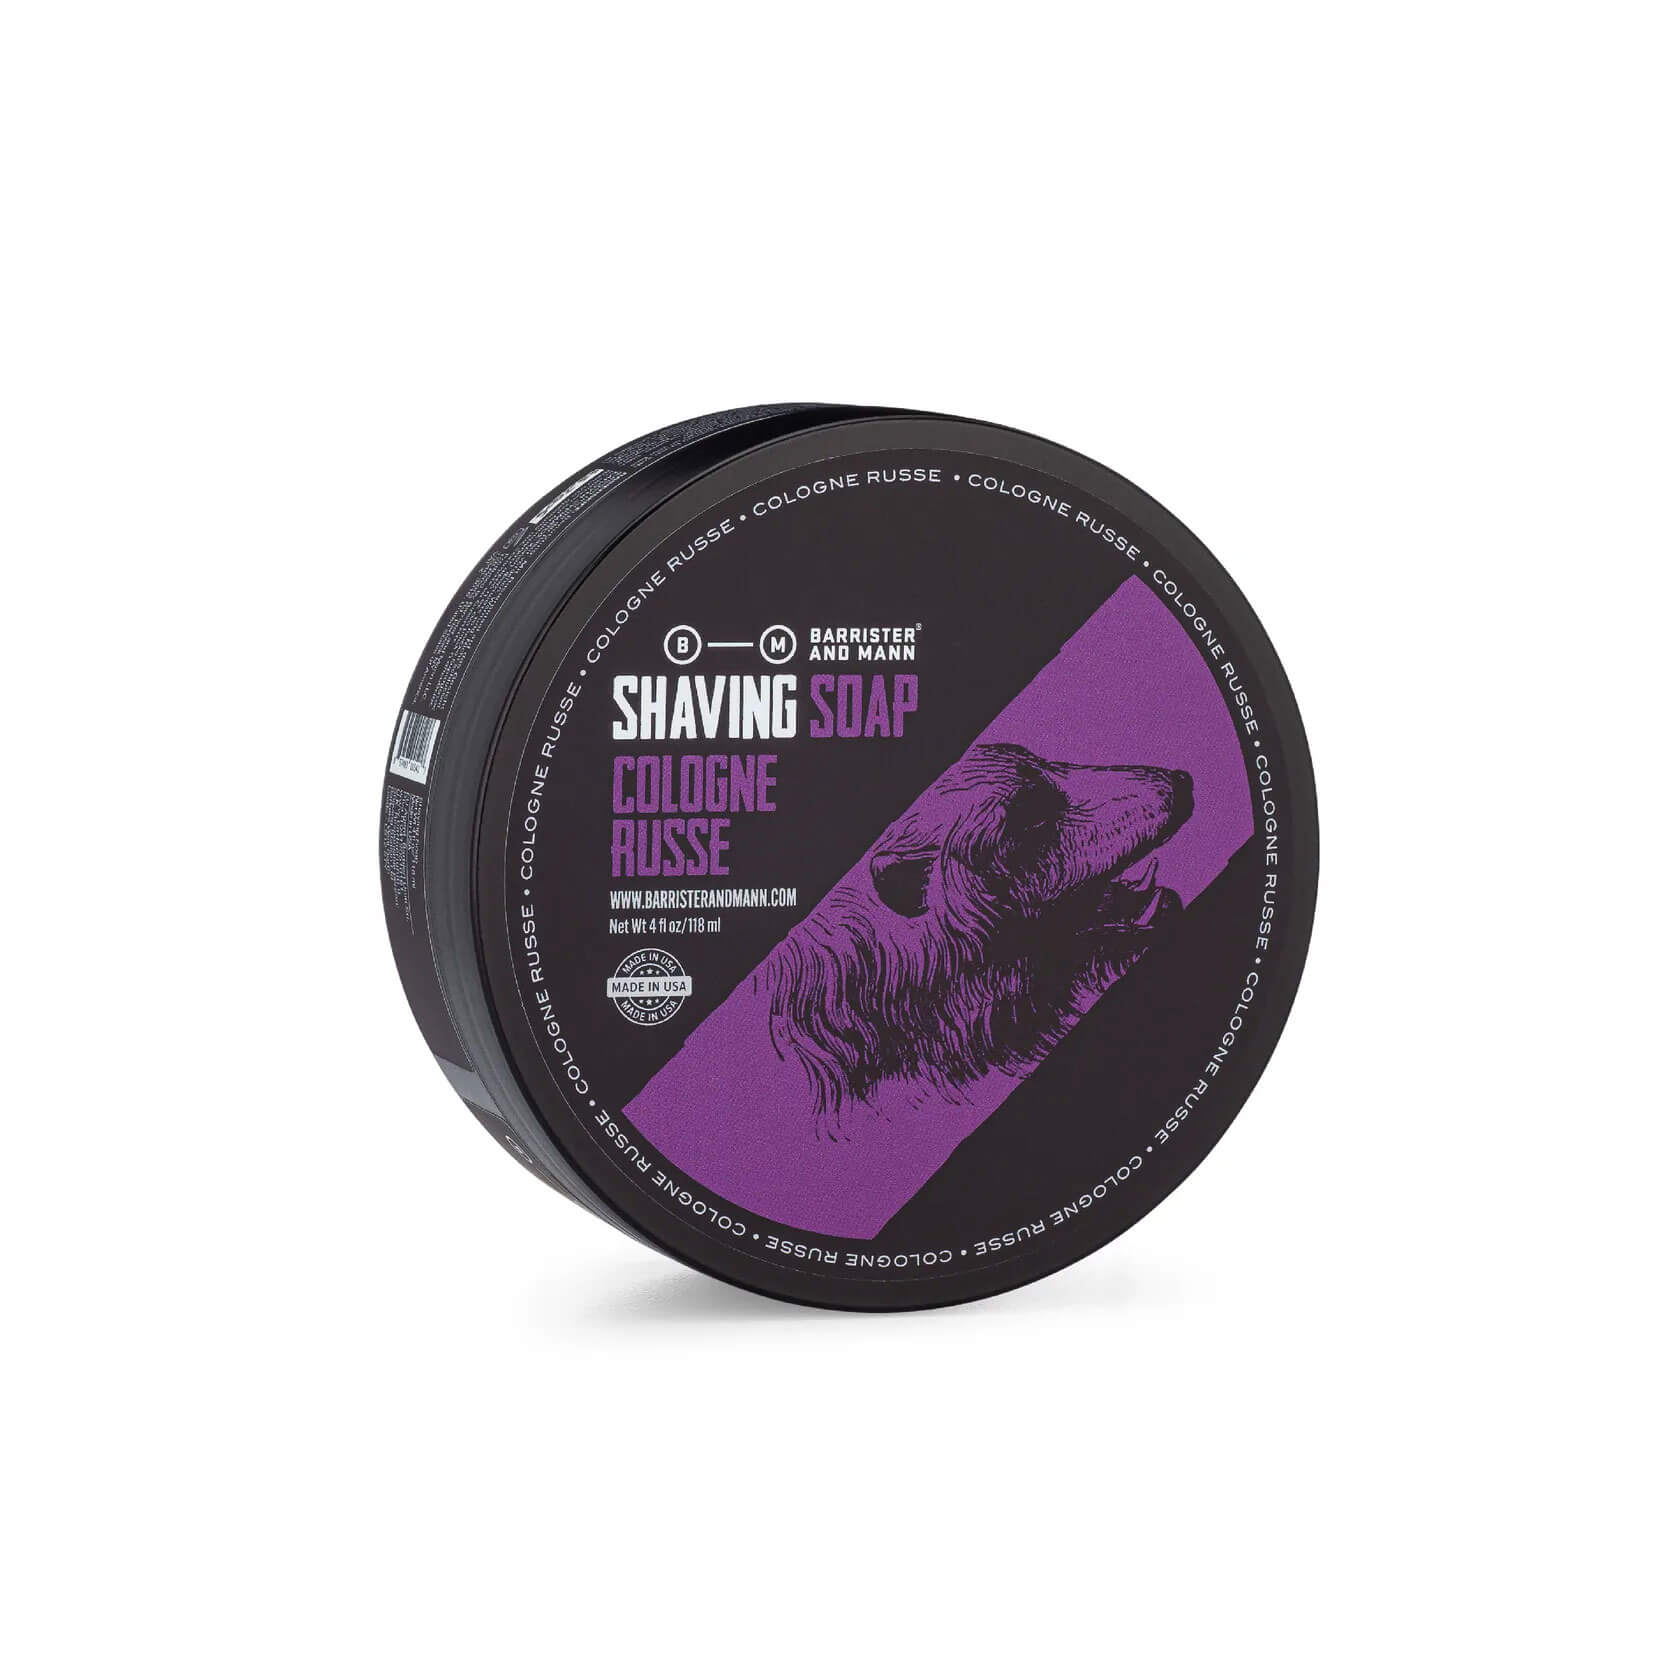 Barrister and Mann Cologne Russe Shaving Soap